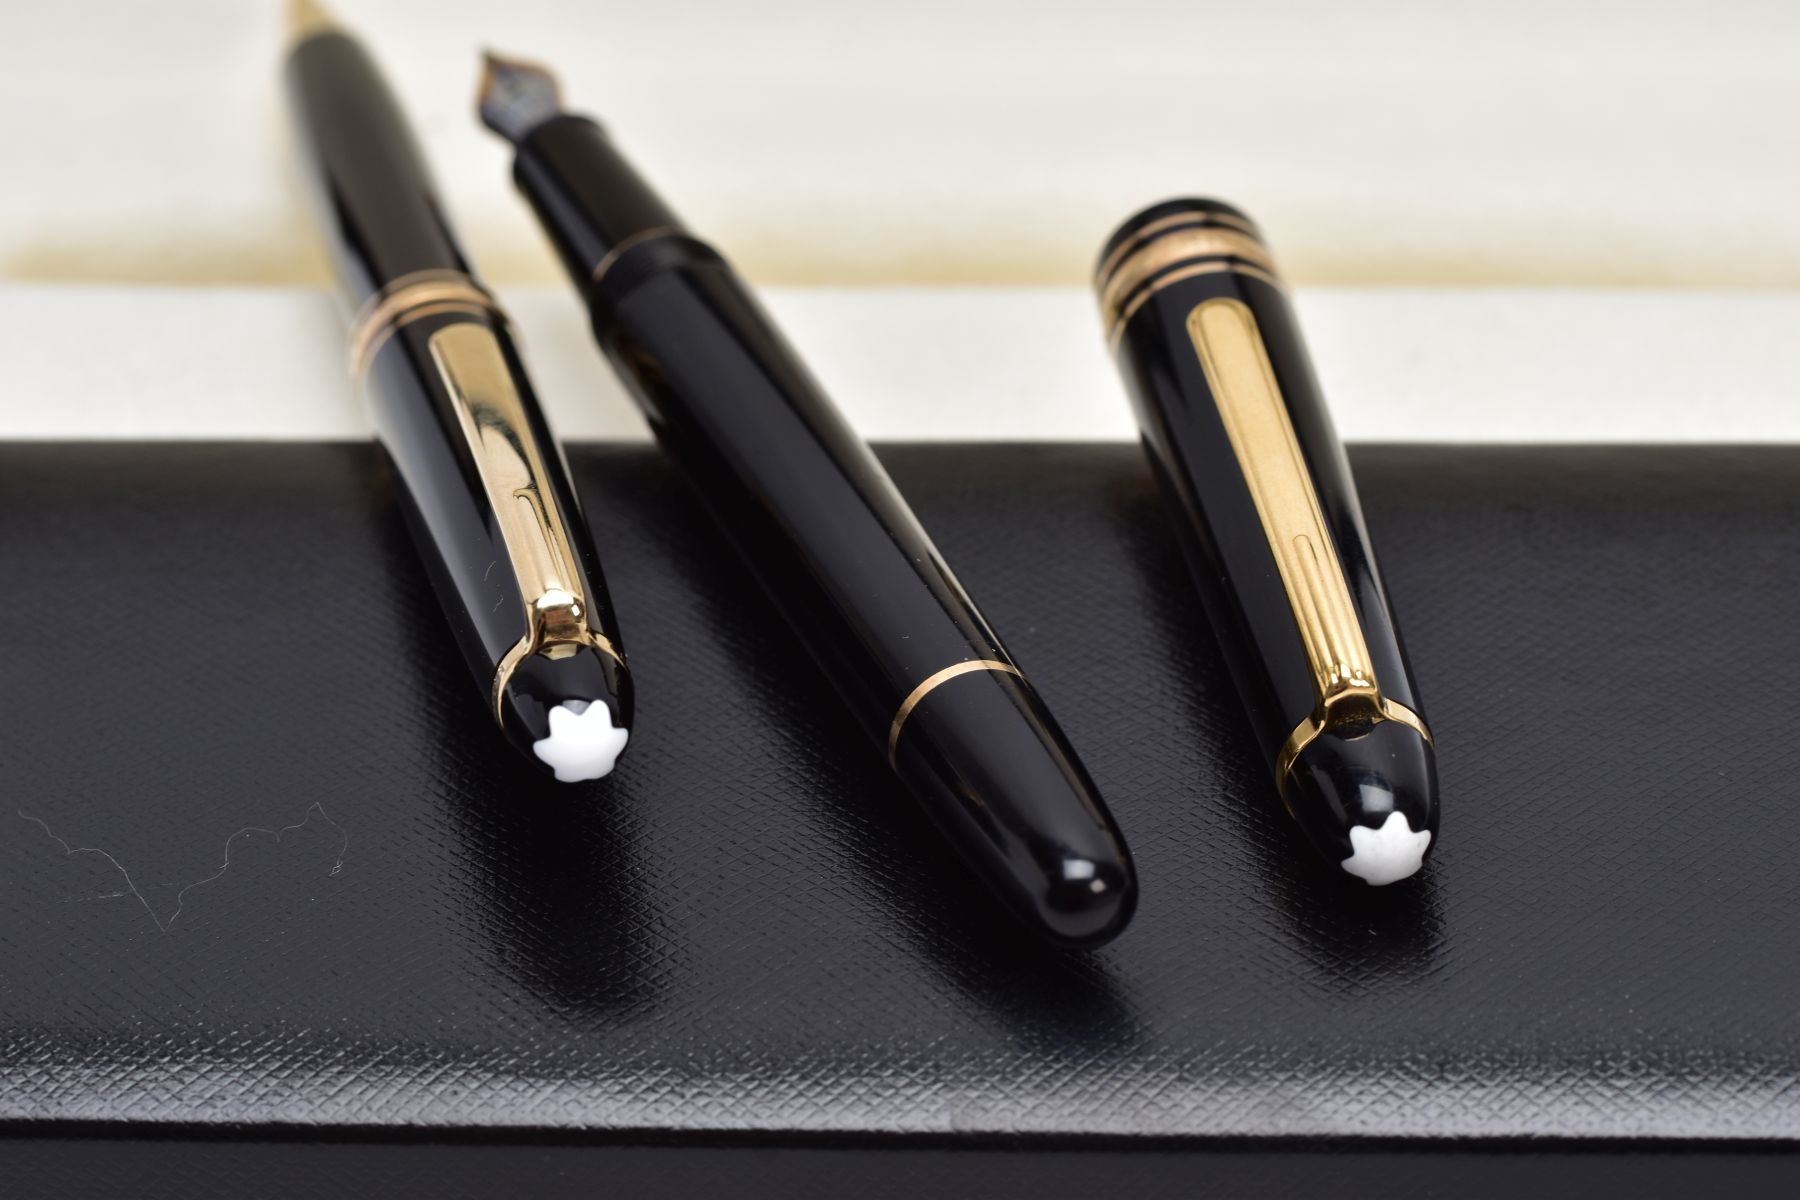 A CASED 'MONT BLANC-MEISTERSTUCK' FOUNTAIN PEN AND BALL POINT PEN, black lacquer with gold - Image 3 of 5